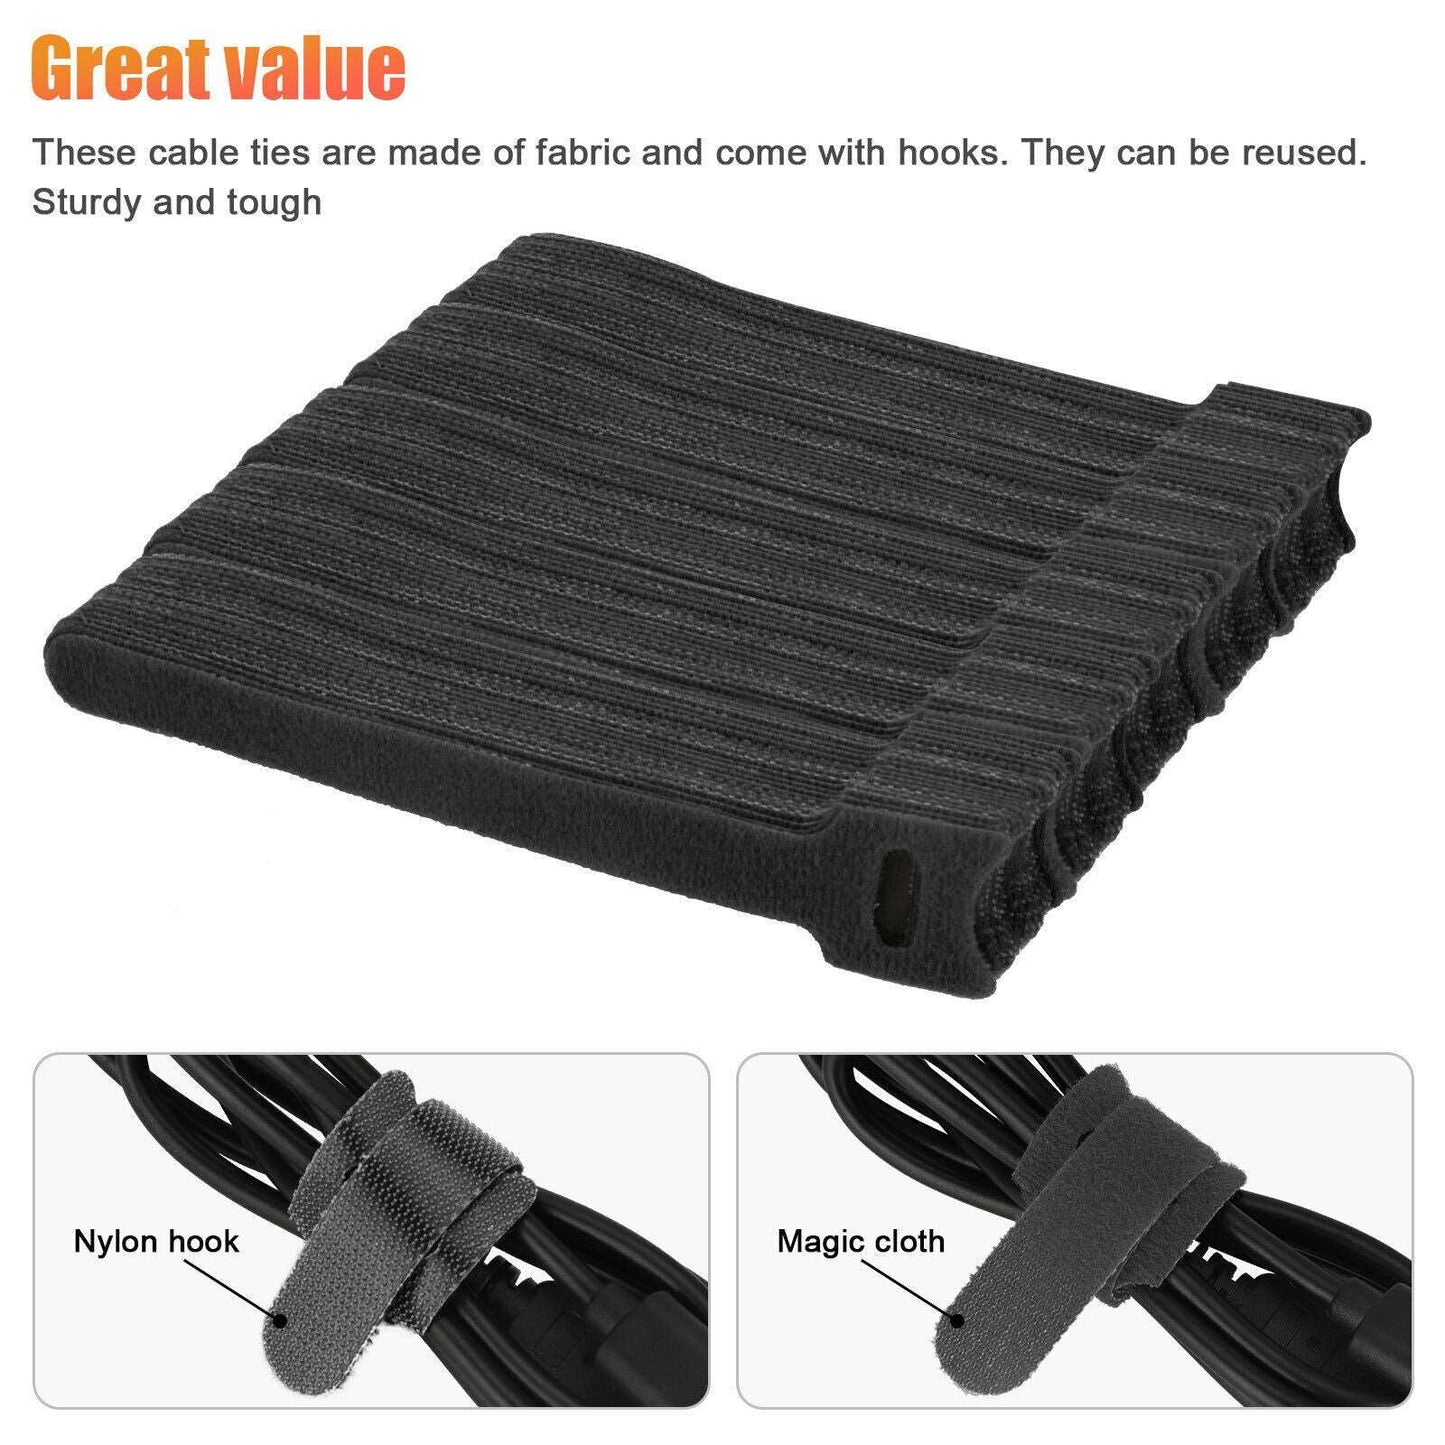 100pcs Velcro Cable Ties Wire And Cable Storage Fixed Self-adhesive Straps Reusable